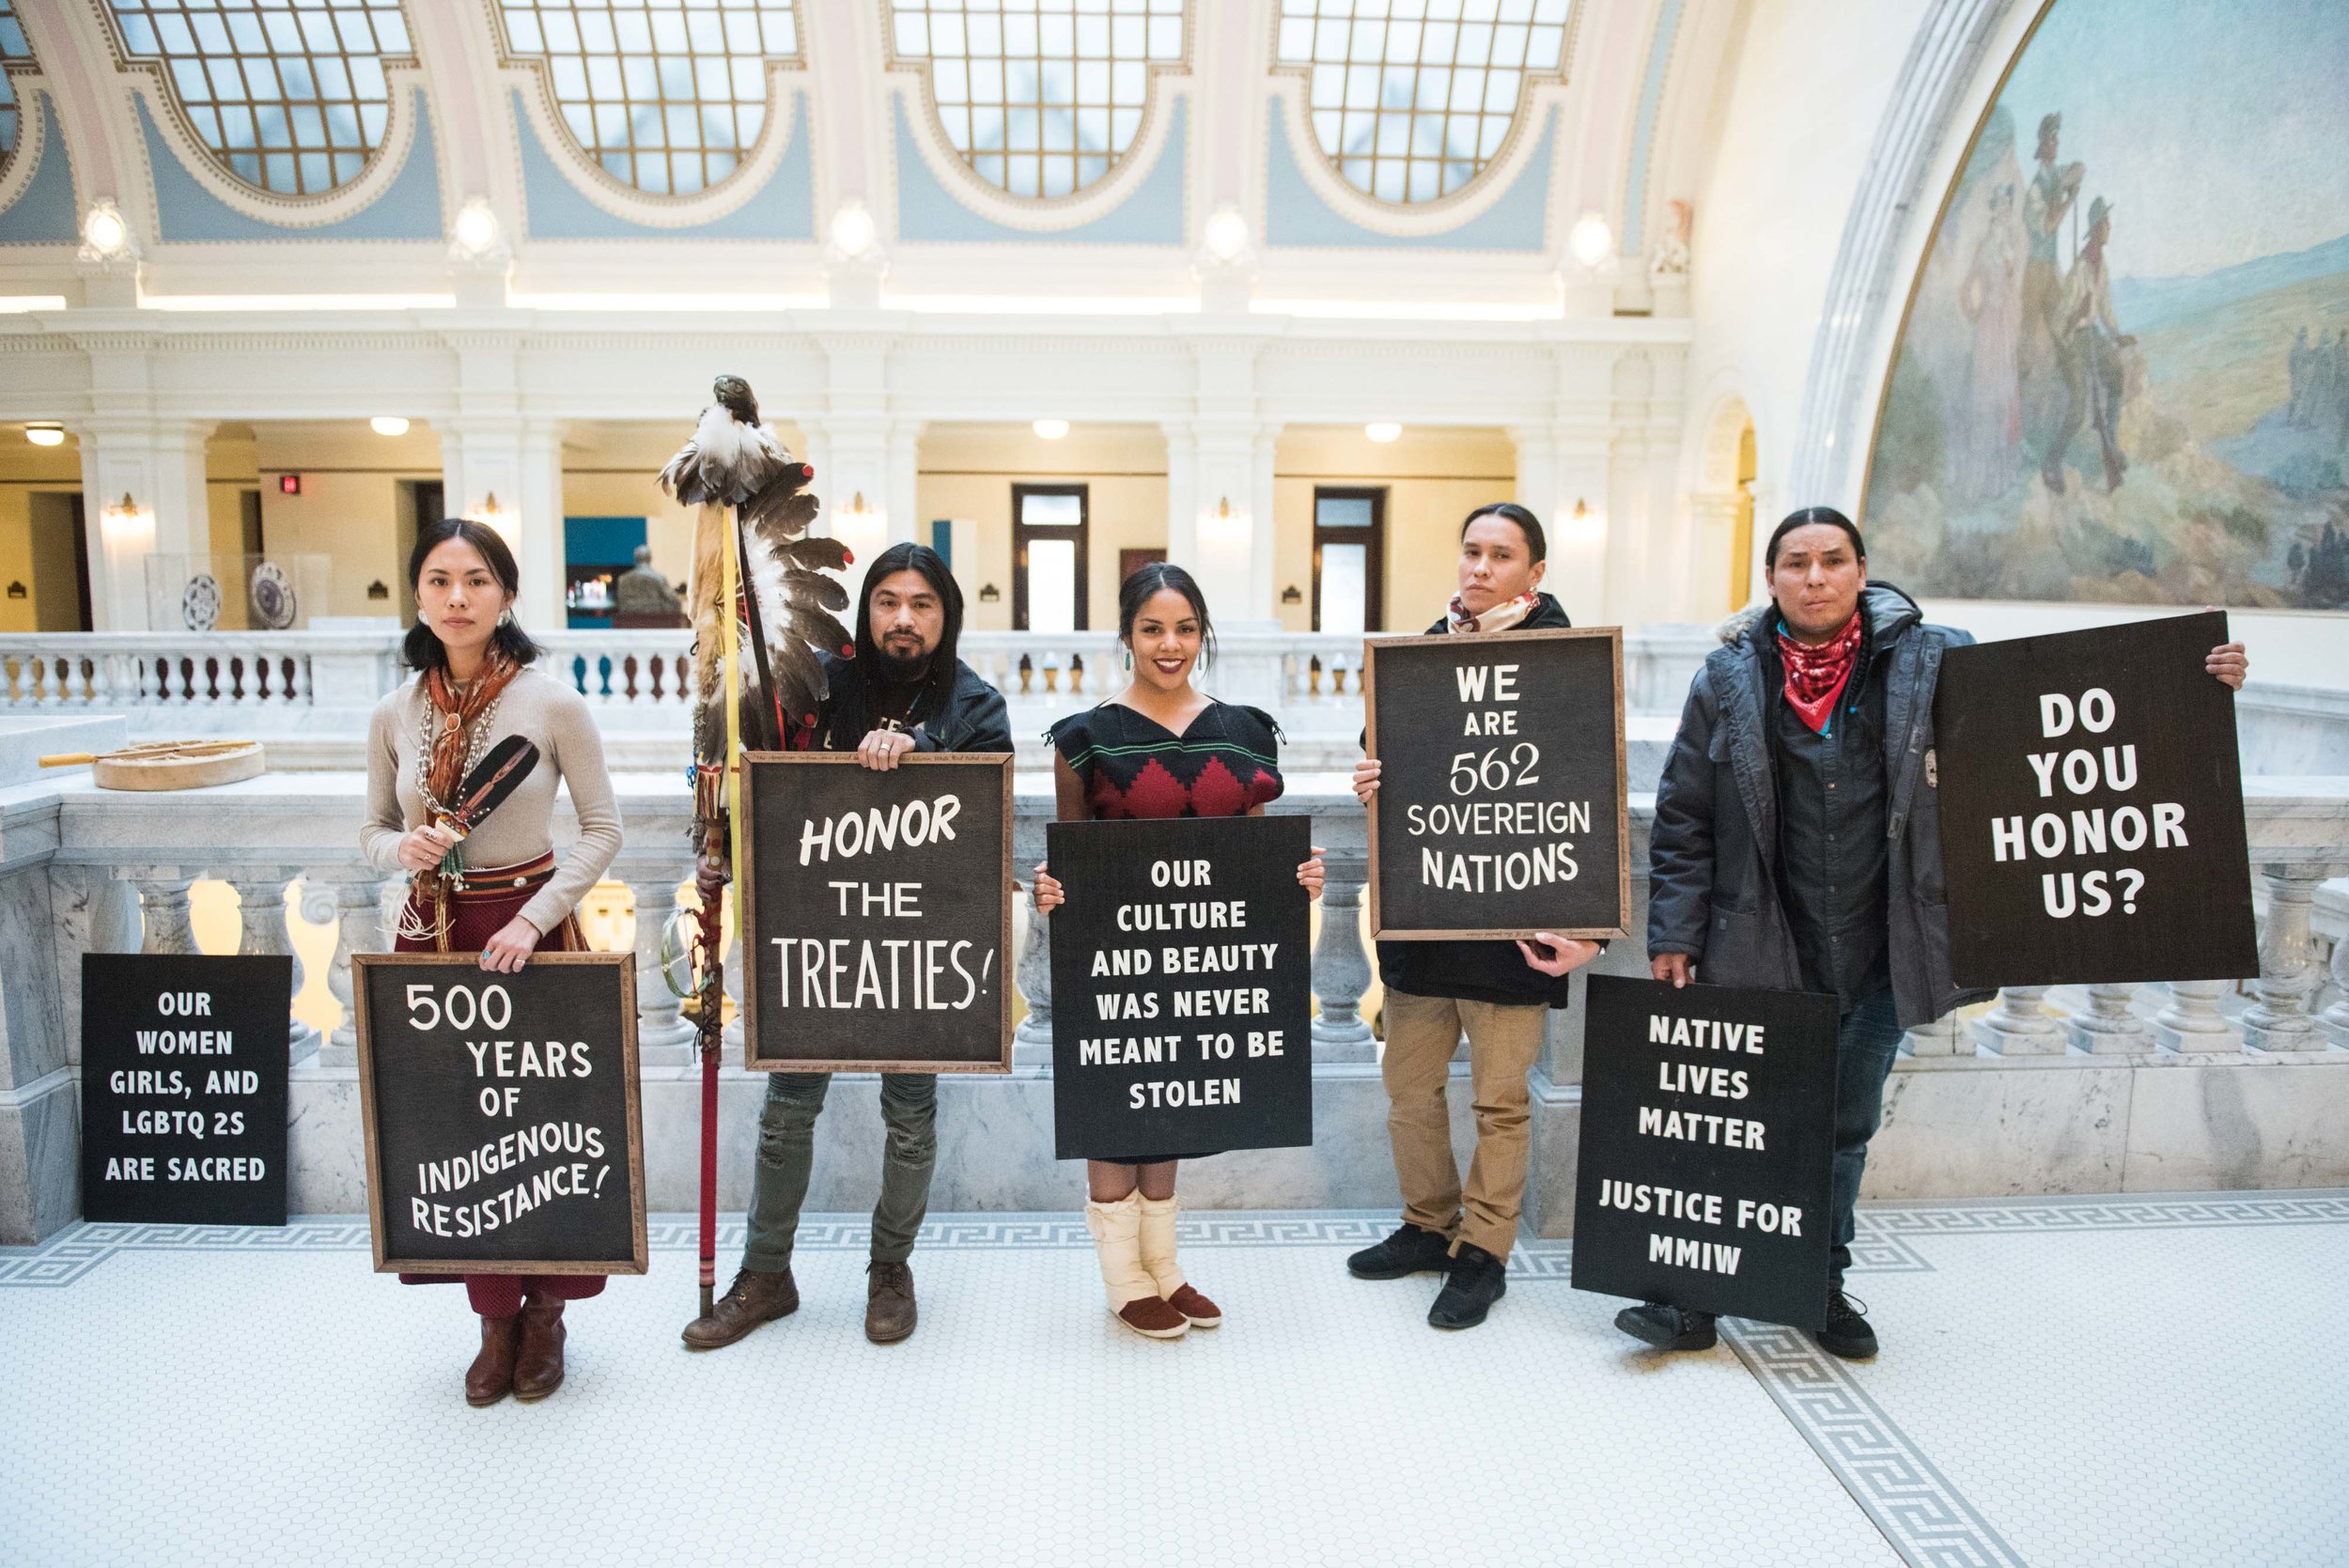  First Nation activists came to testify at the Utah State Capitol against HJR1, legislation that will exclude Utah from the Antiquities Act. The Antiquities Act was intended to allow the President of the United States to set aside certain natural are